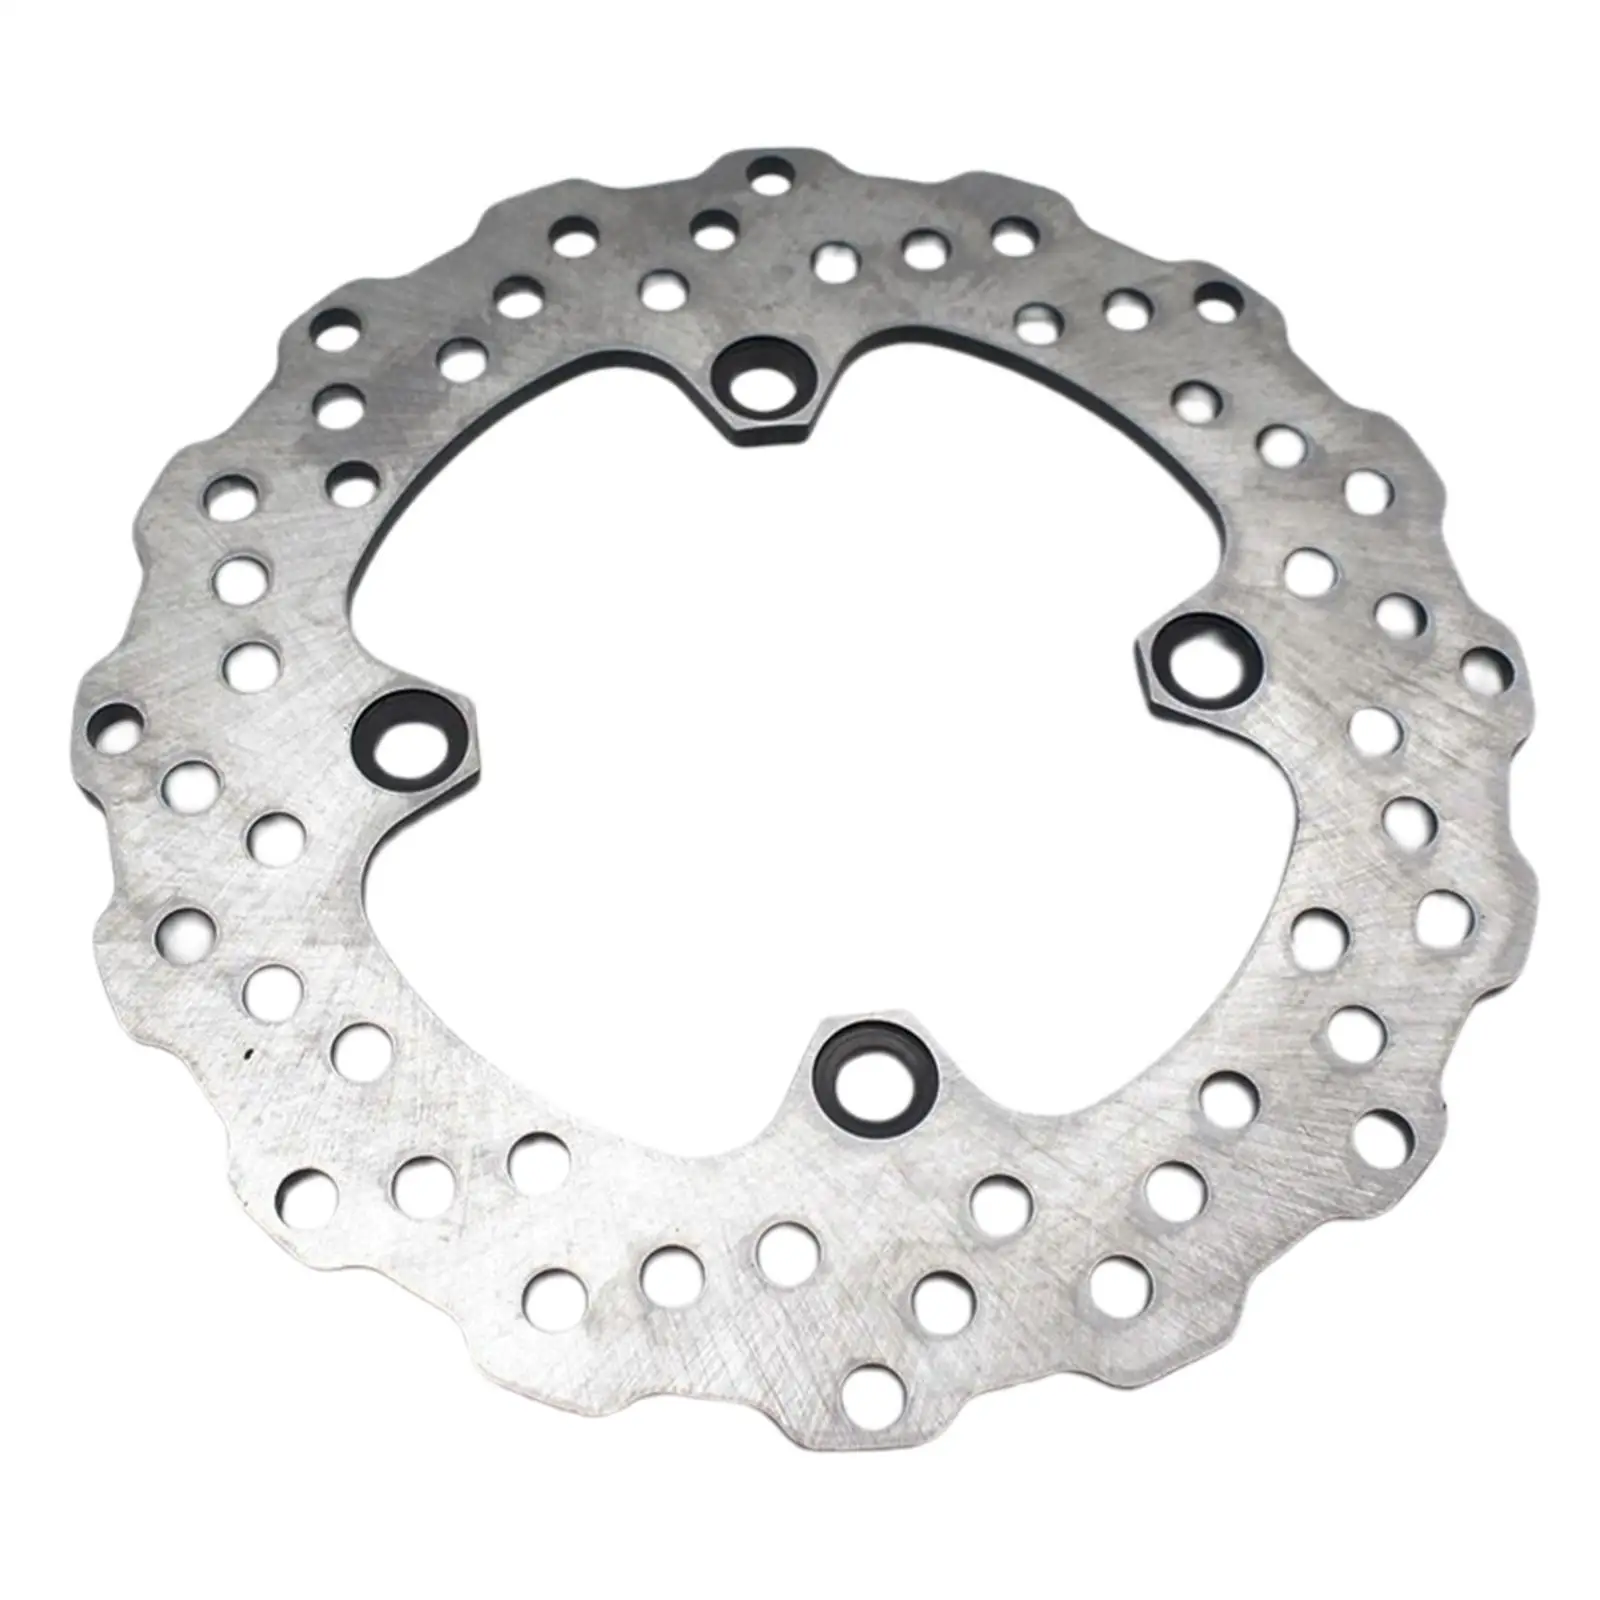 Rear Brake Disc Rotor, Motorcycle Replacement, Accessories 220mm  for   ER-6 Cc 